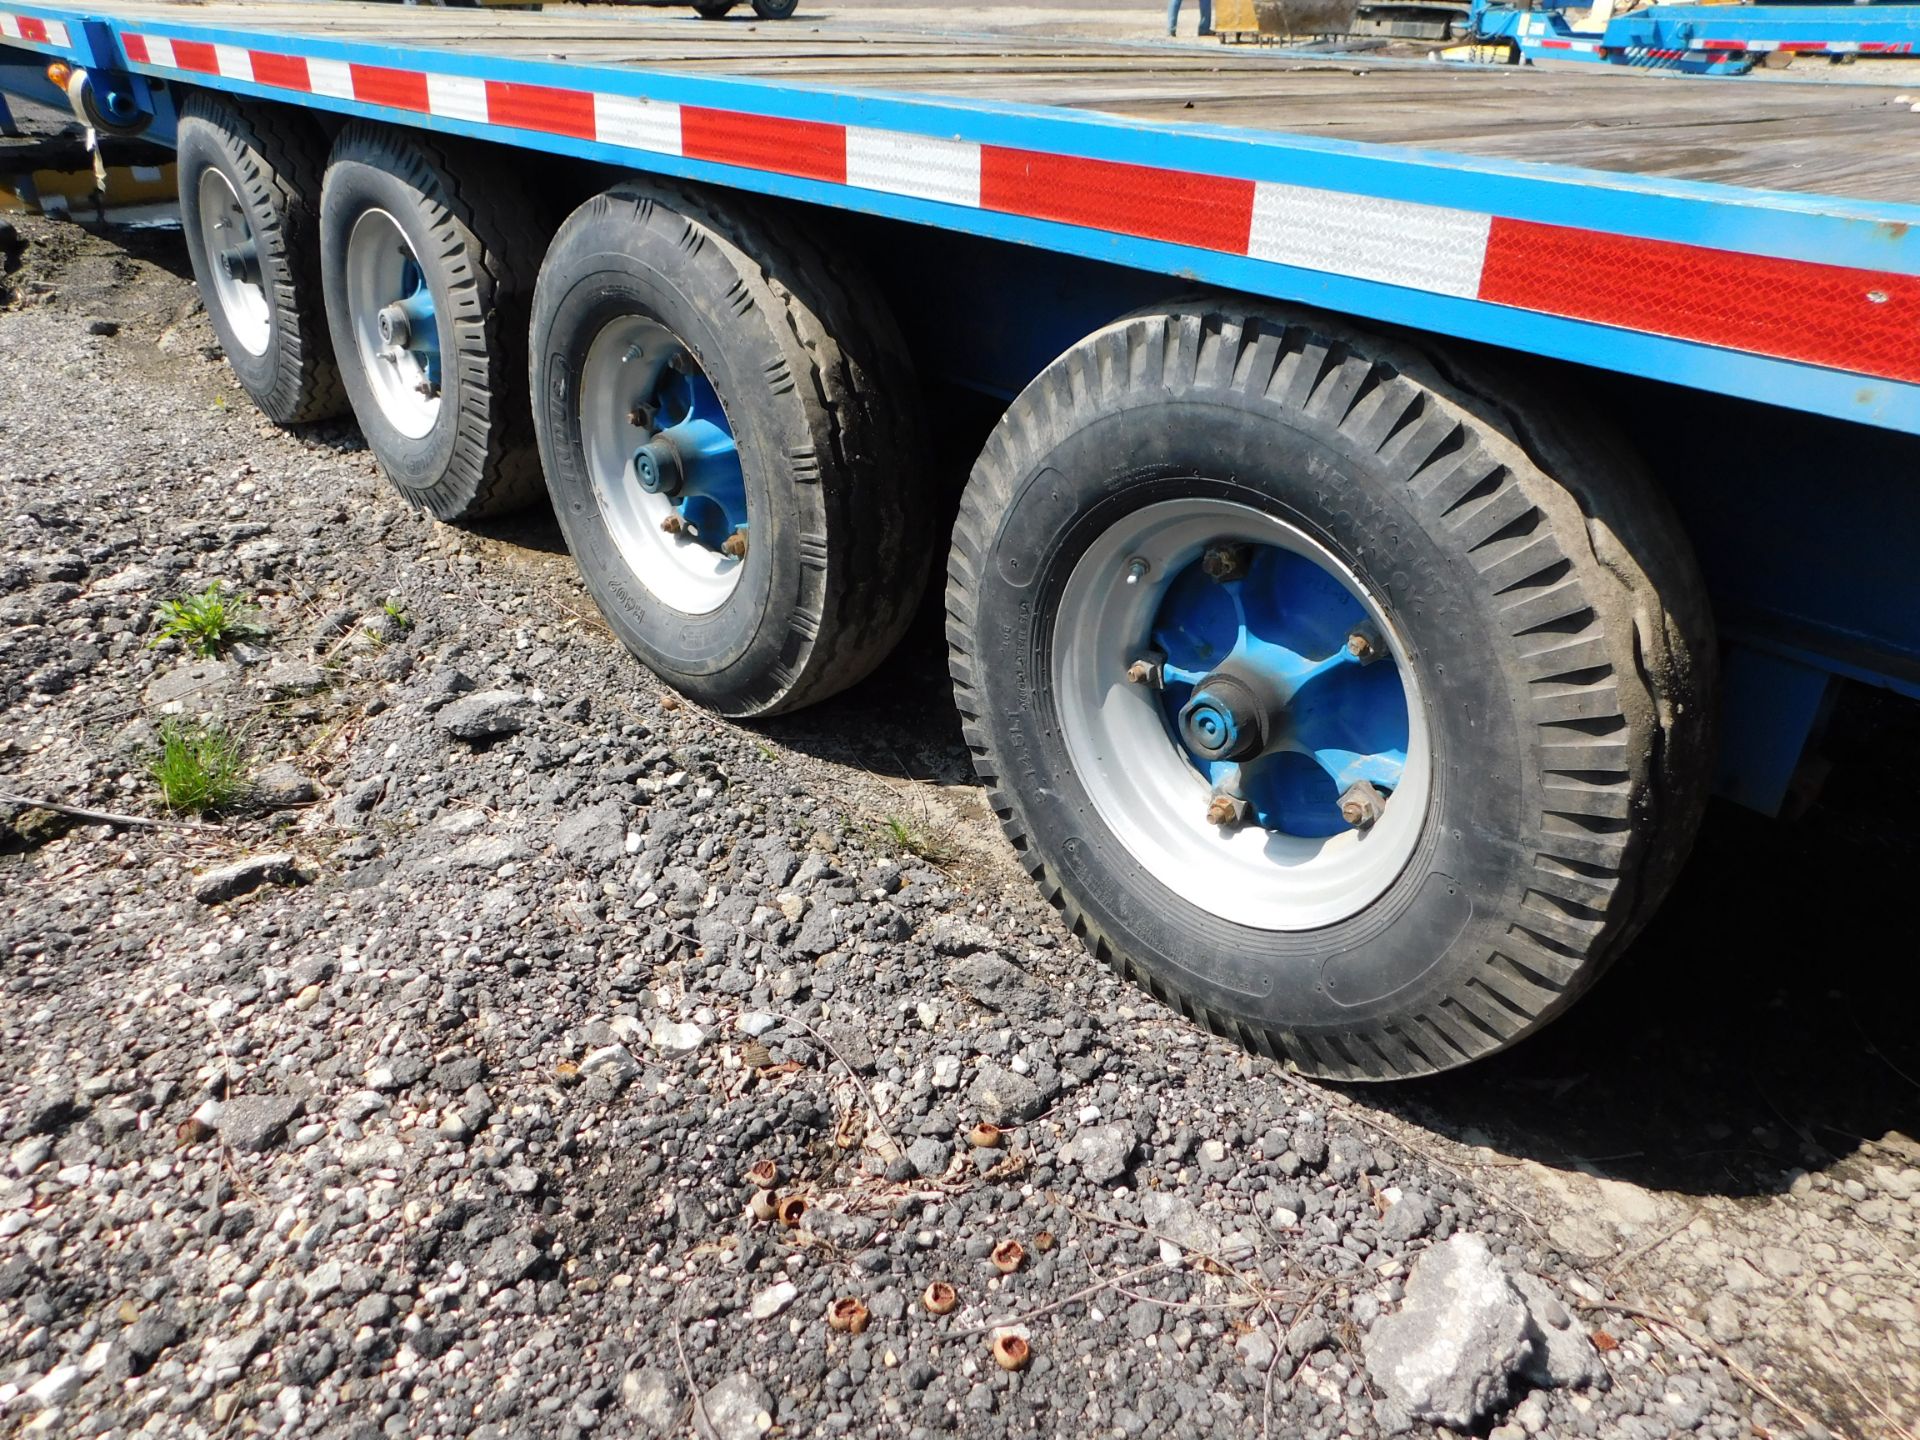 8' x 40' Flat Bed Tongue Pull Trailer, Wood Deck, Quad-Axle, 8-Wheels, Pintle Hitch - Image 7 of 11